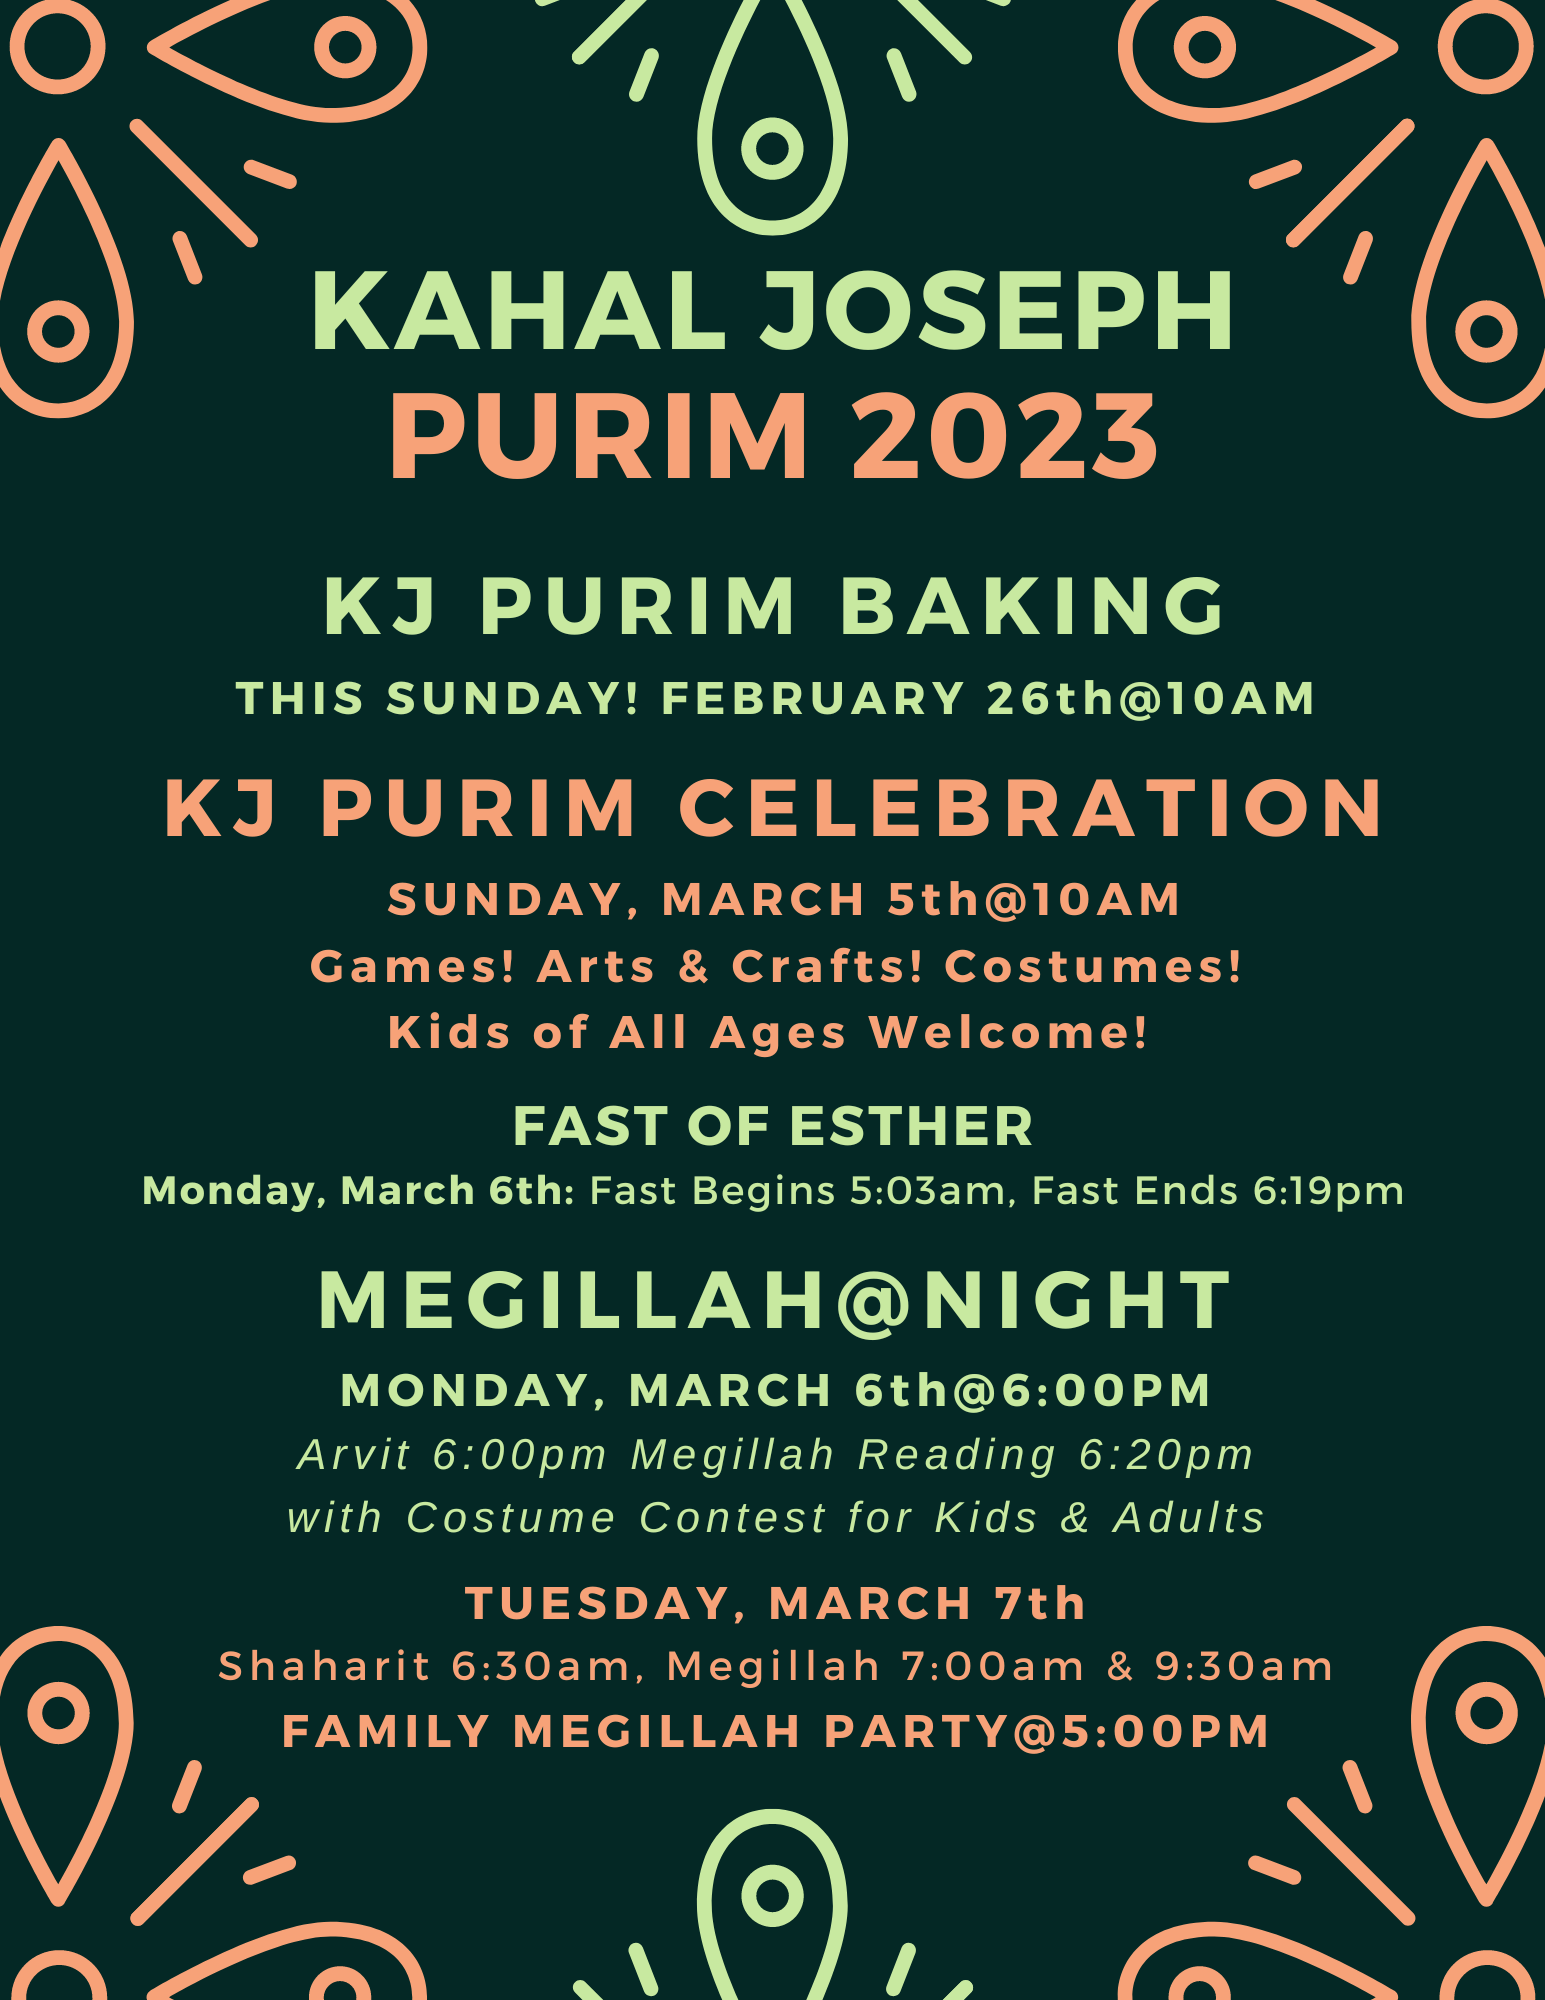 Save the Dates for Purim